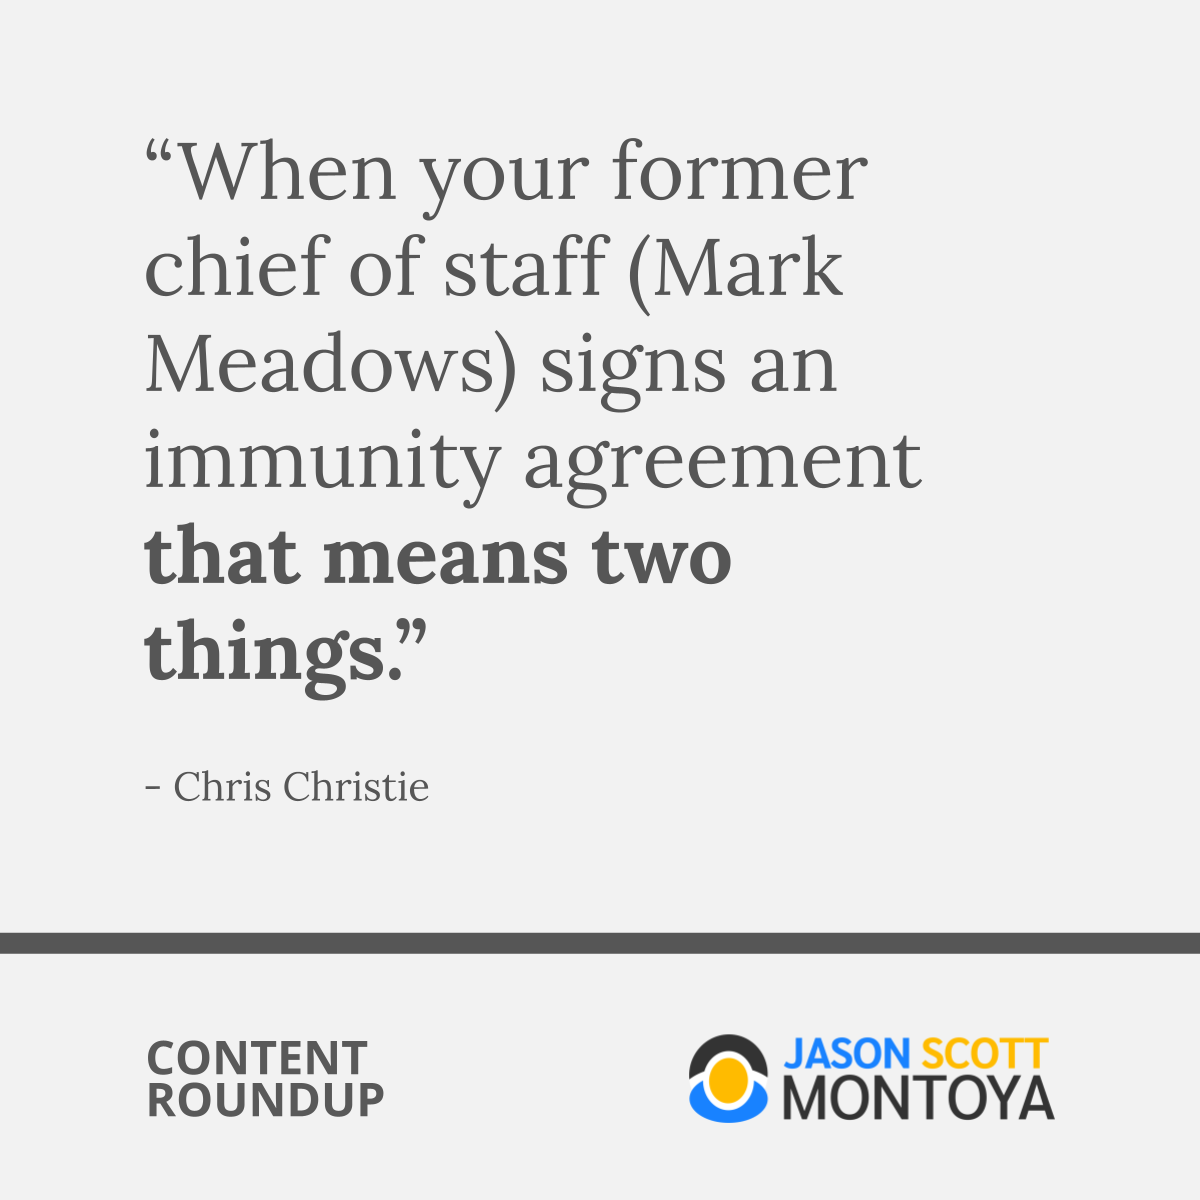 “When your former chief of staff (Mark Meadows) signs an immunity agreement that means two things.”  - Chris Christie